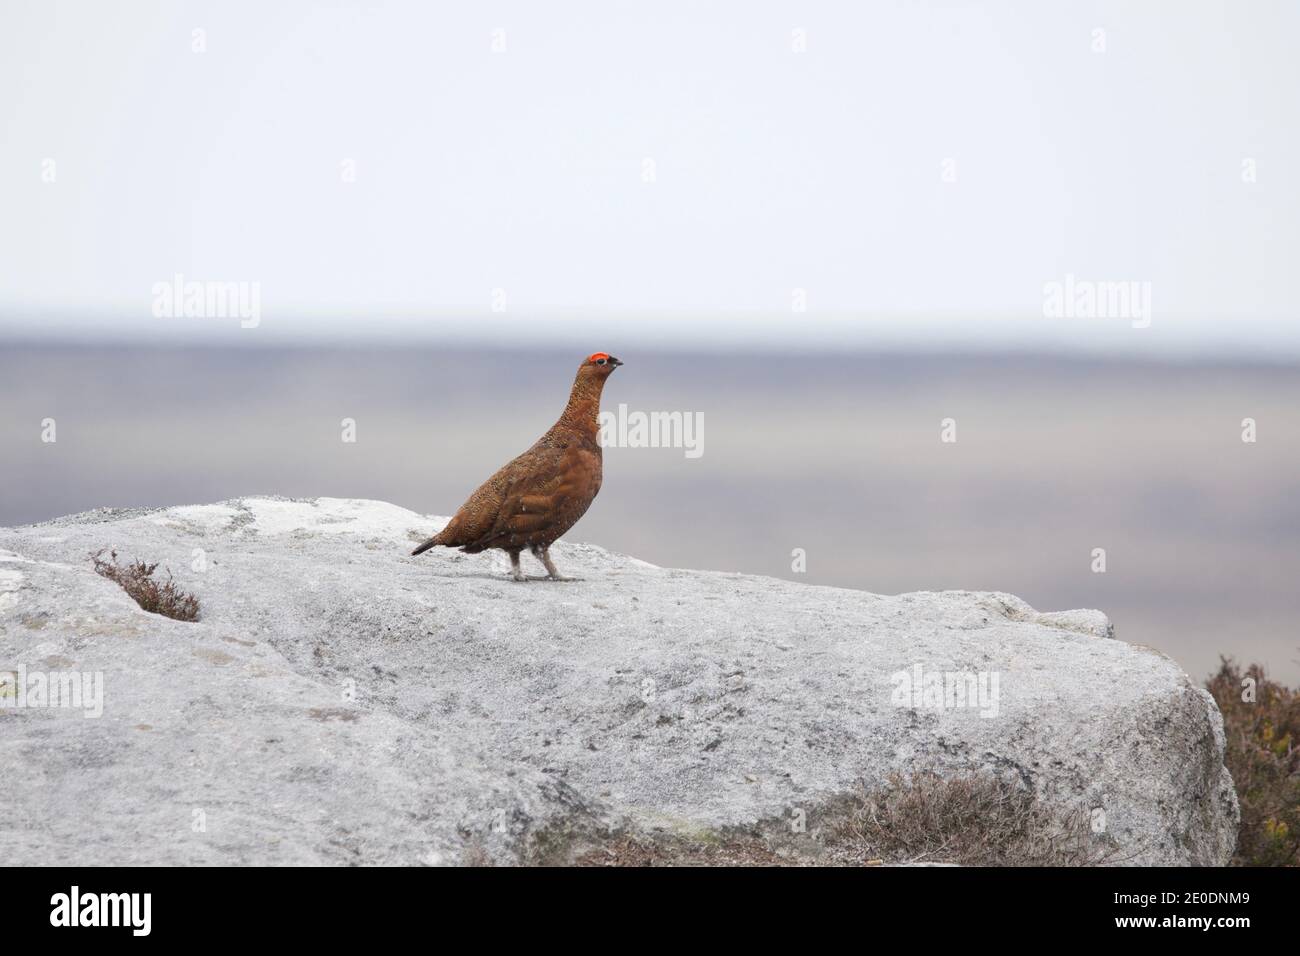 Male Red Grouse stood on a rock (Lagopus lagopus scoticus) in heather moorlands at Ladybower, Derbyshire, UK Stock Photo